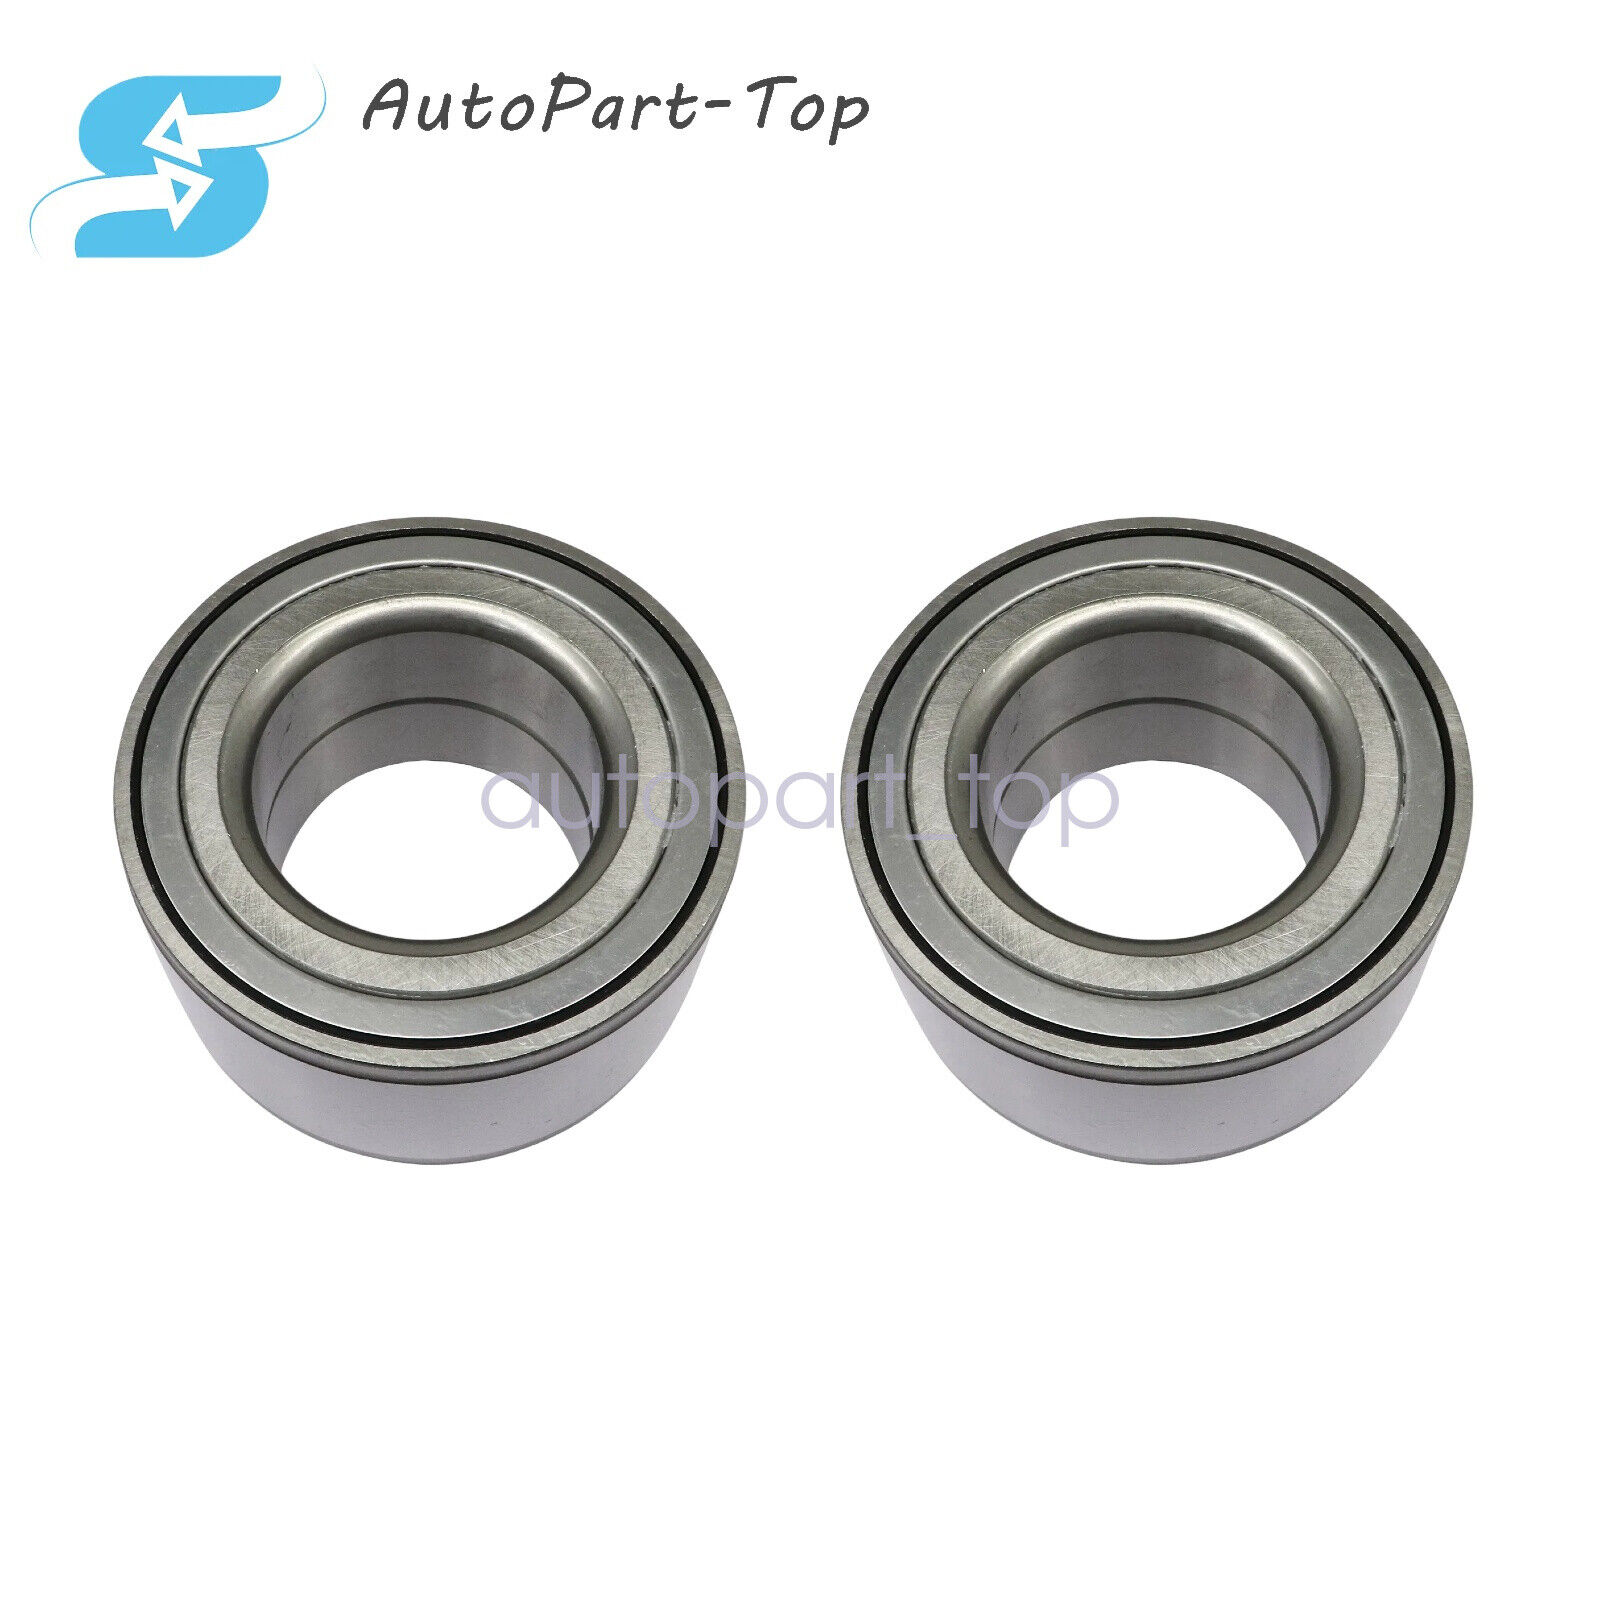 Pair (2) Front Wheel Bearings Kit fit for Toyota Sequoia 4Runner Tacoma Tundra